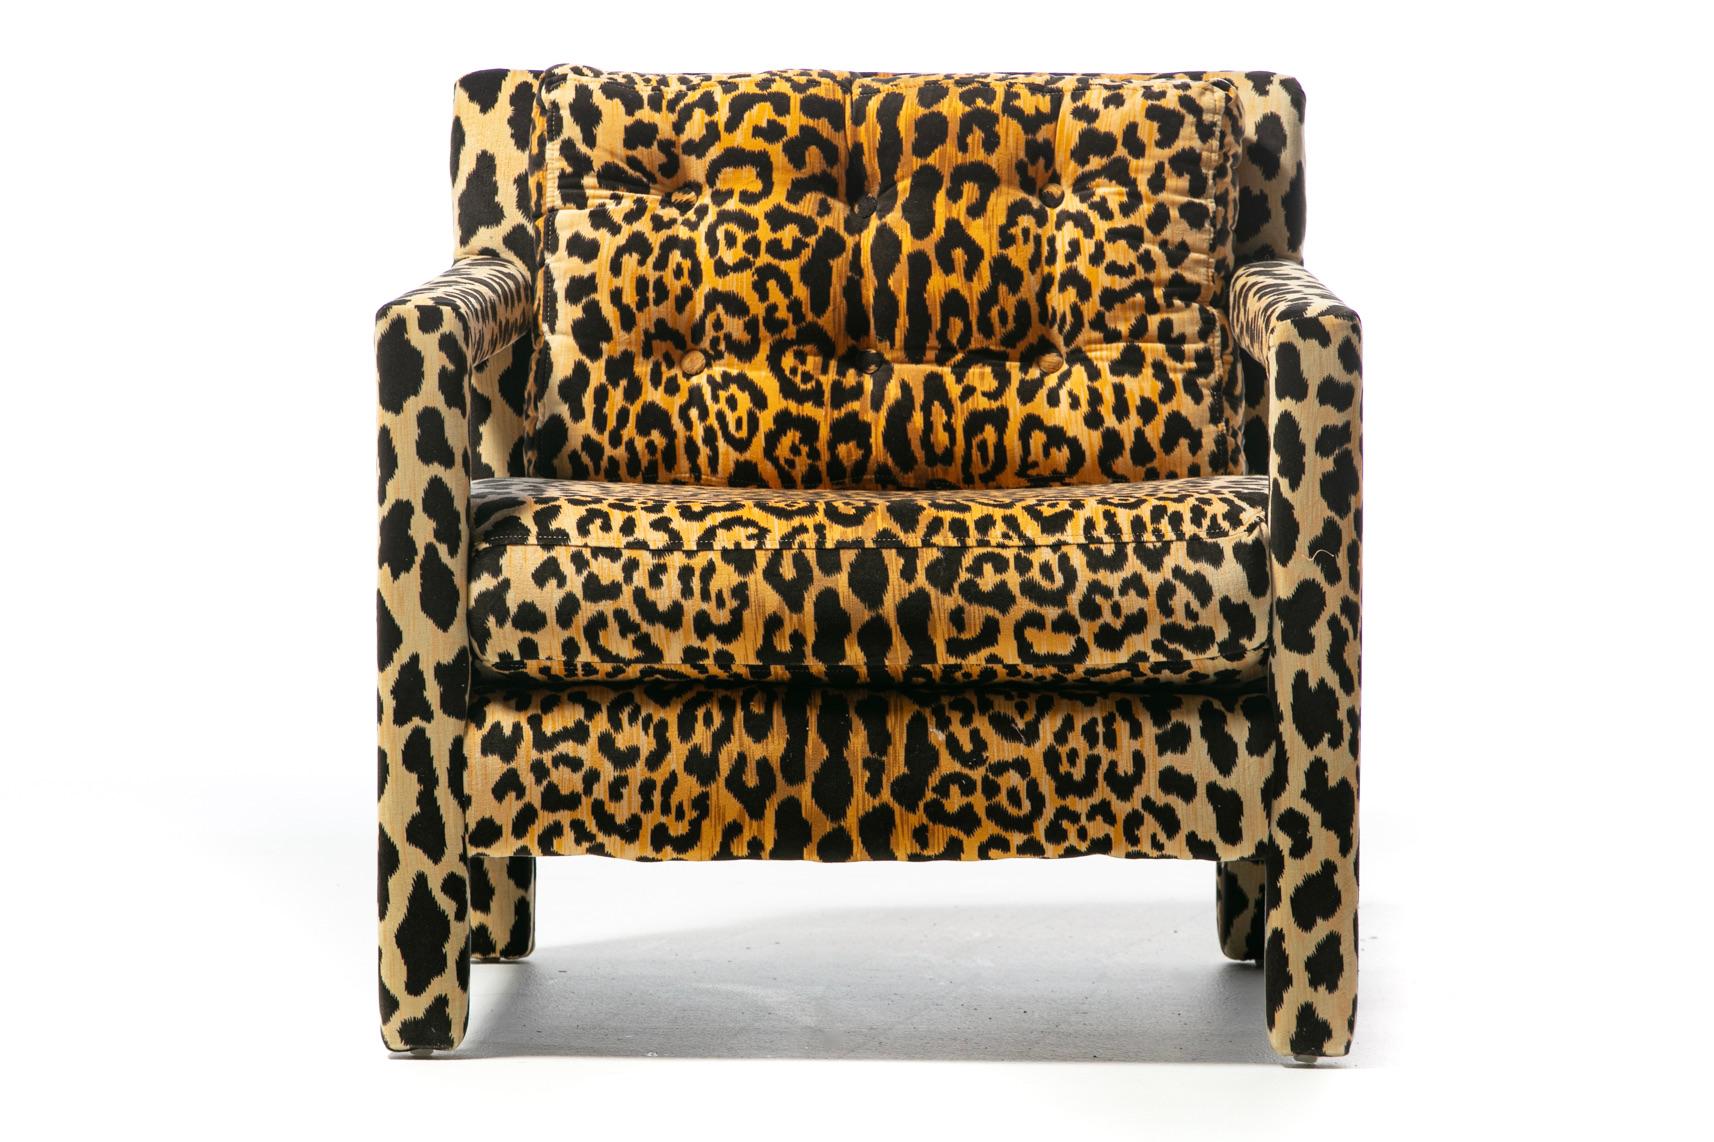 Pair of Milo Baughman Style Mid Century Parsons Chairs in Leopard Velvet c. 1970 For Sale 8